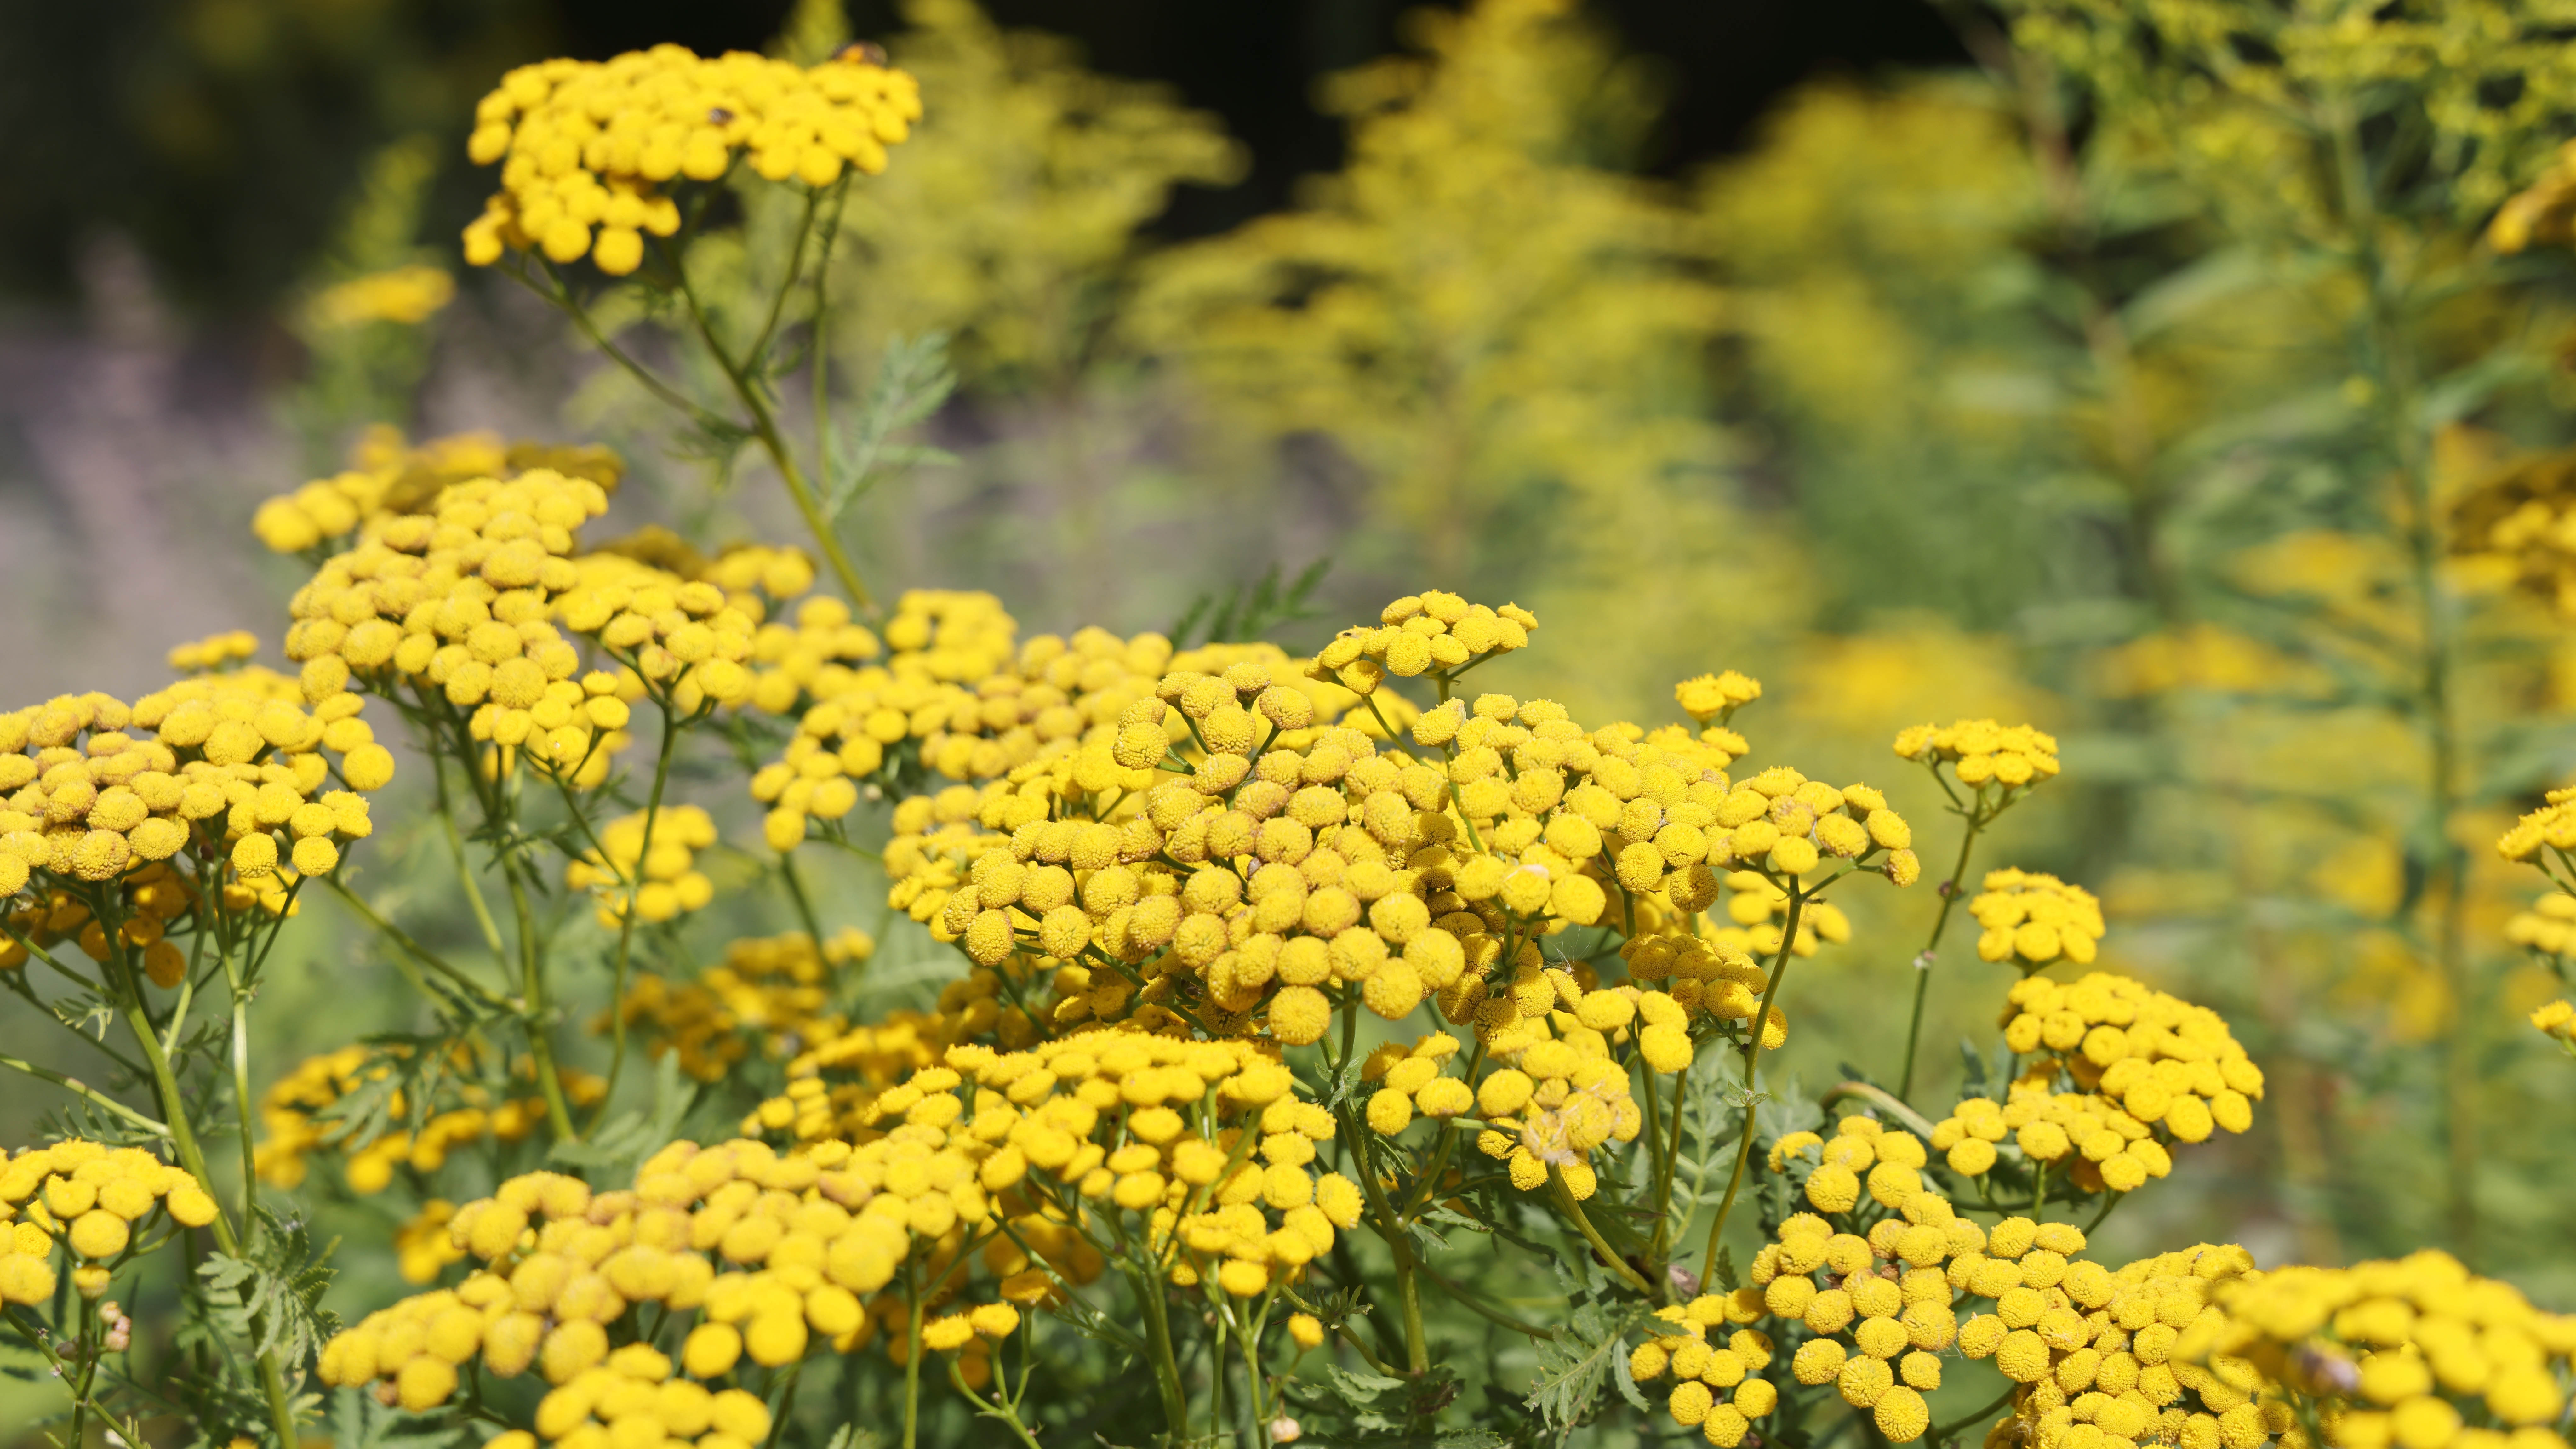 Tansy growing in the field